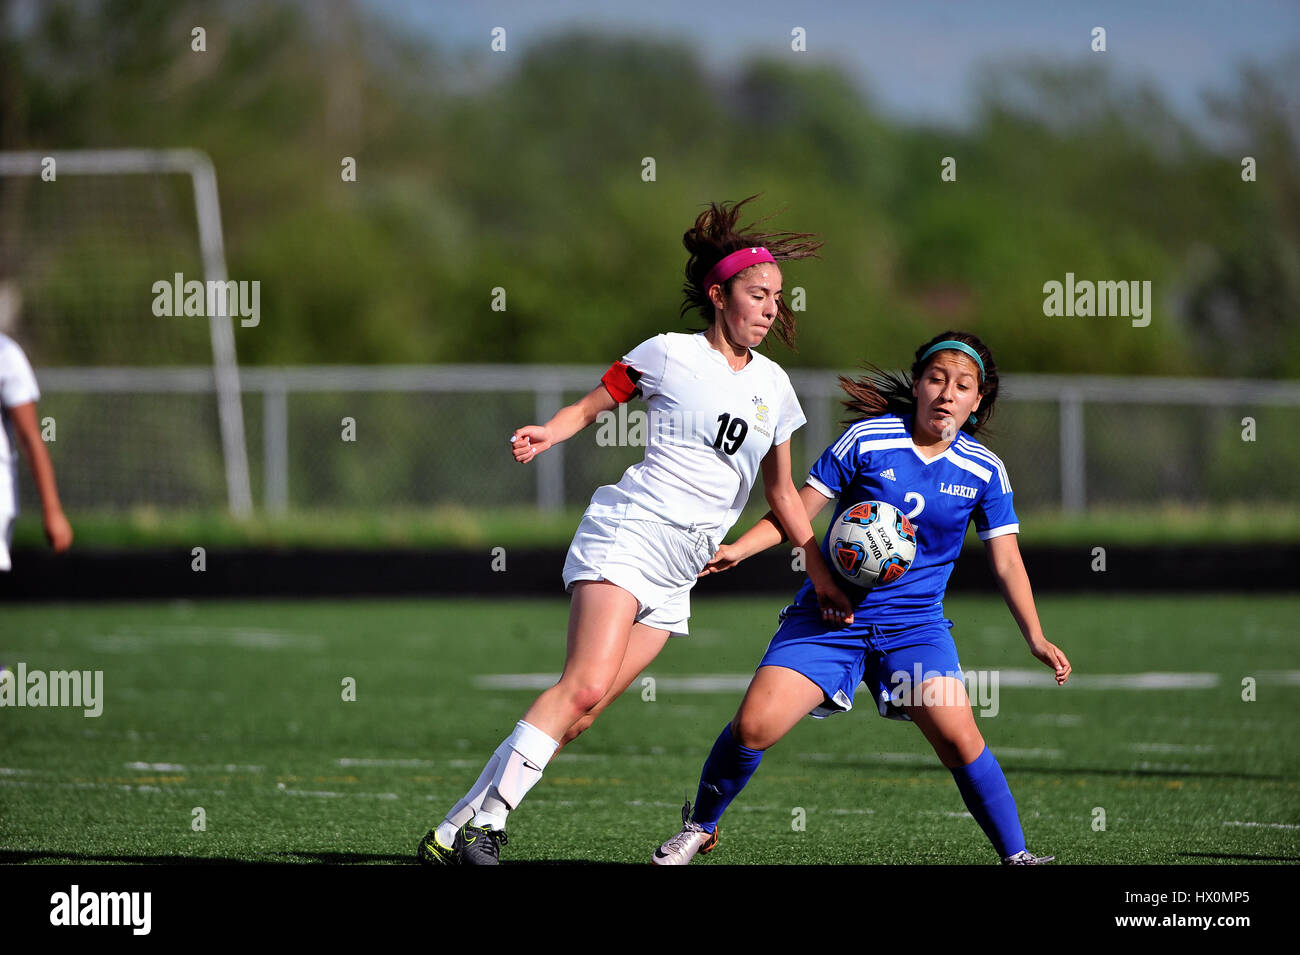 Opposing players in pursuit of a loose ball.during a high school soccer match, USA. Stock Photo